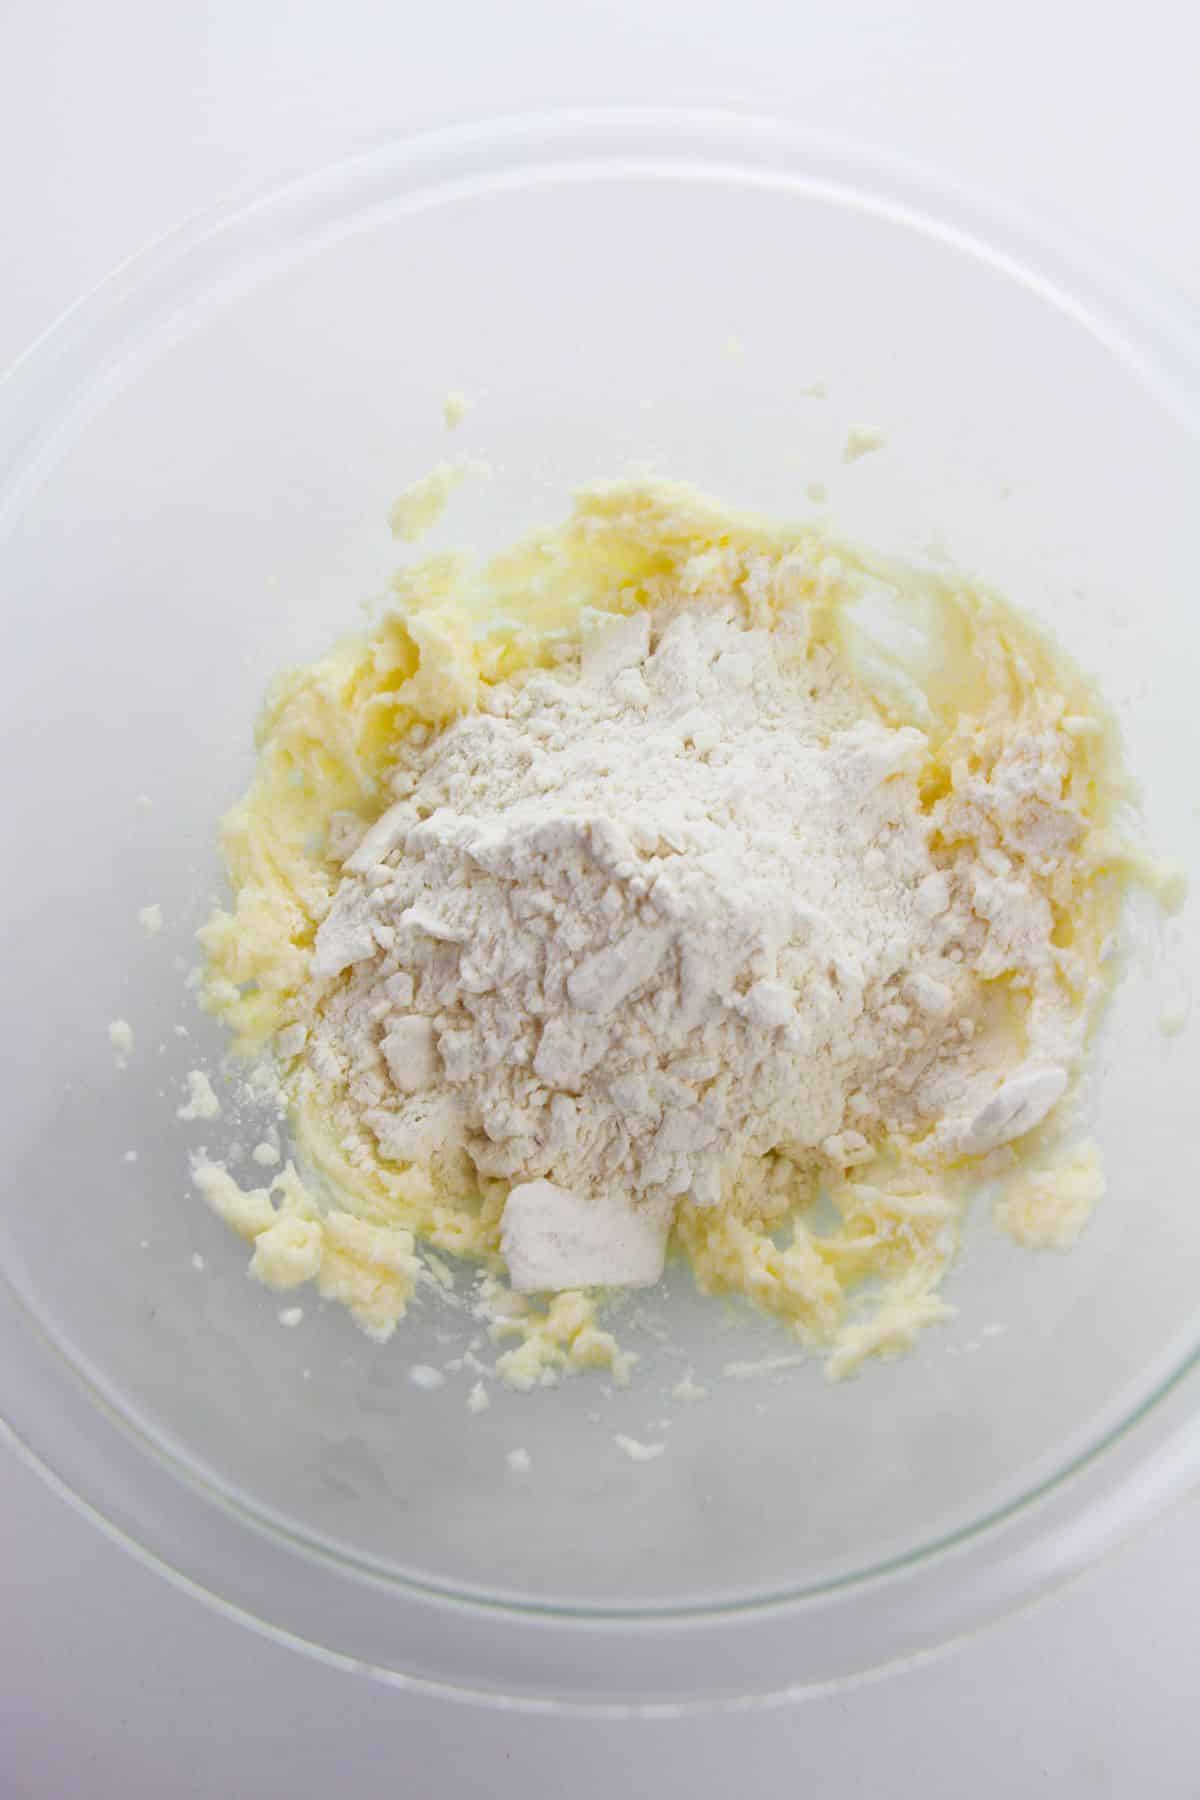 the dry ingredients added into the batter in the glass mixing bowl.